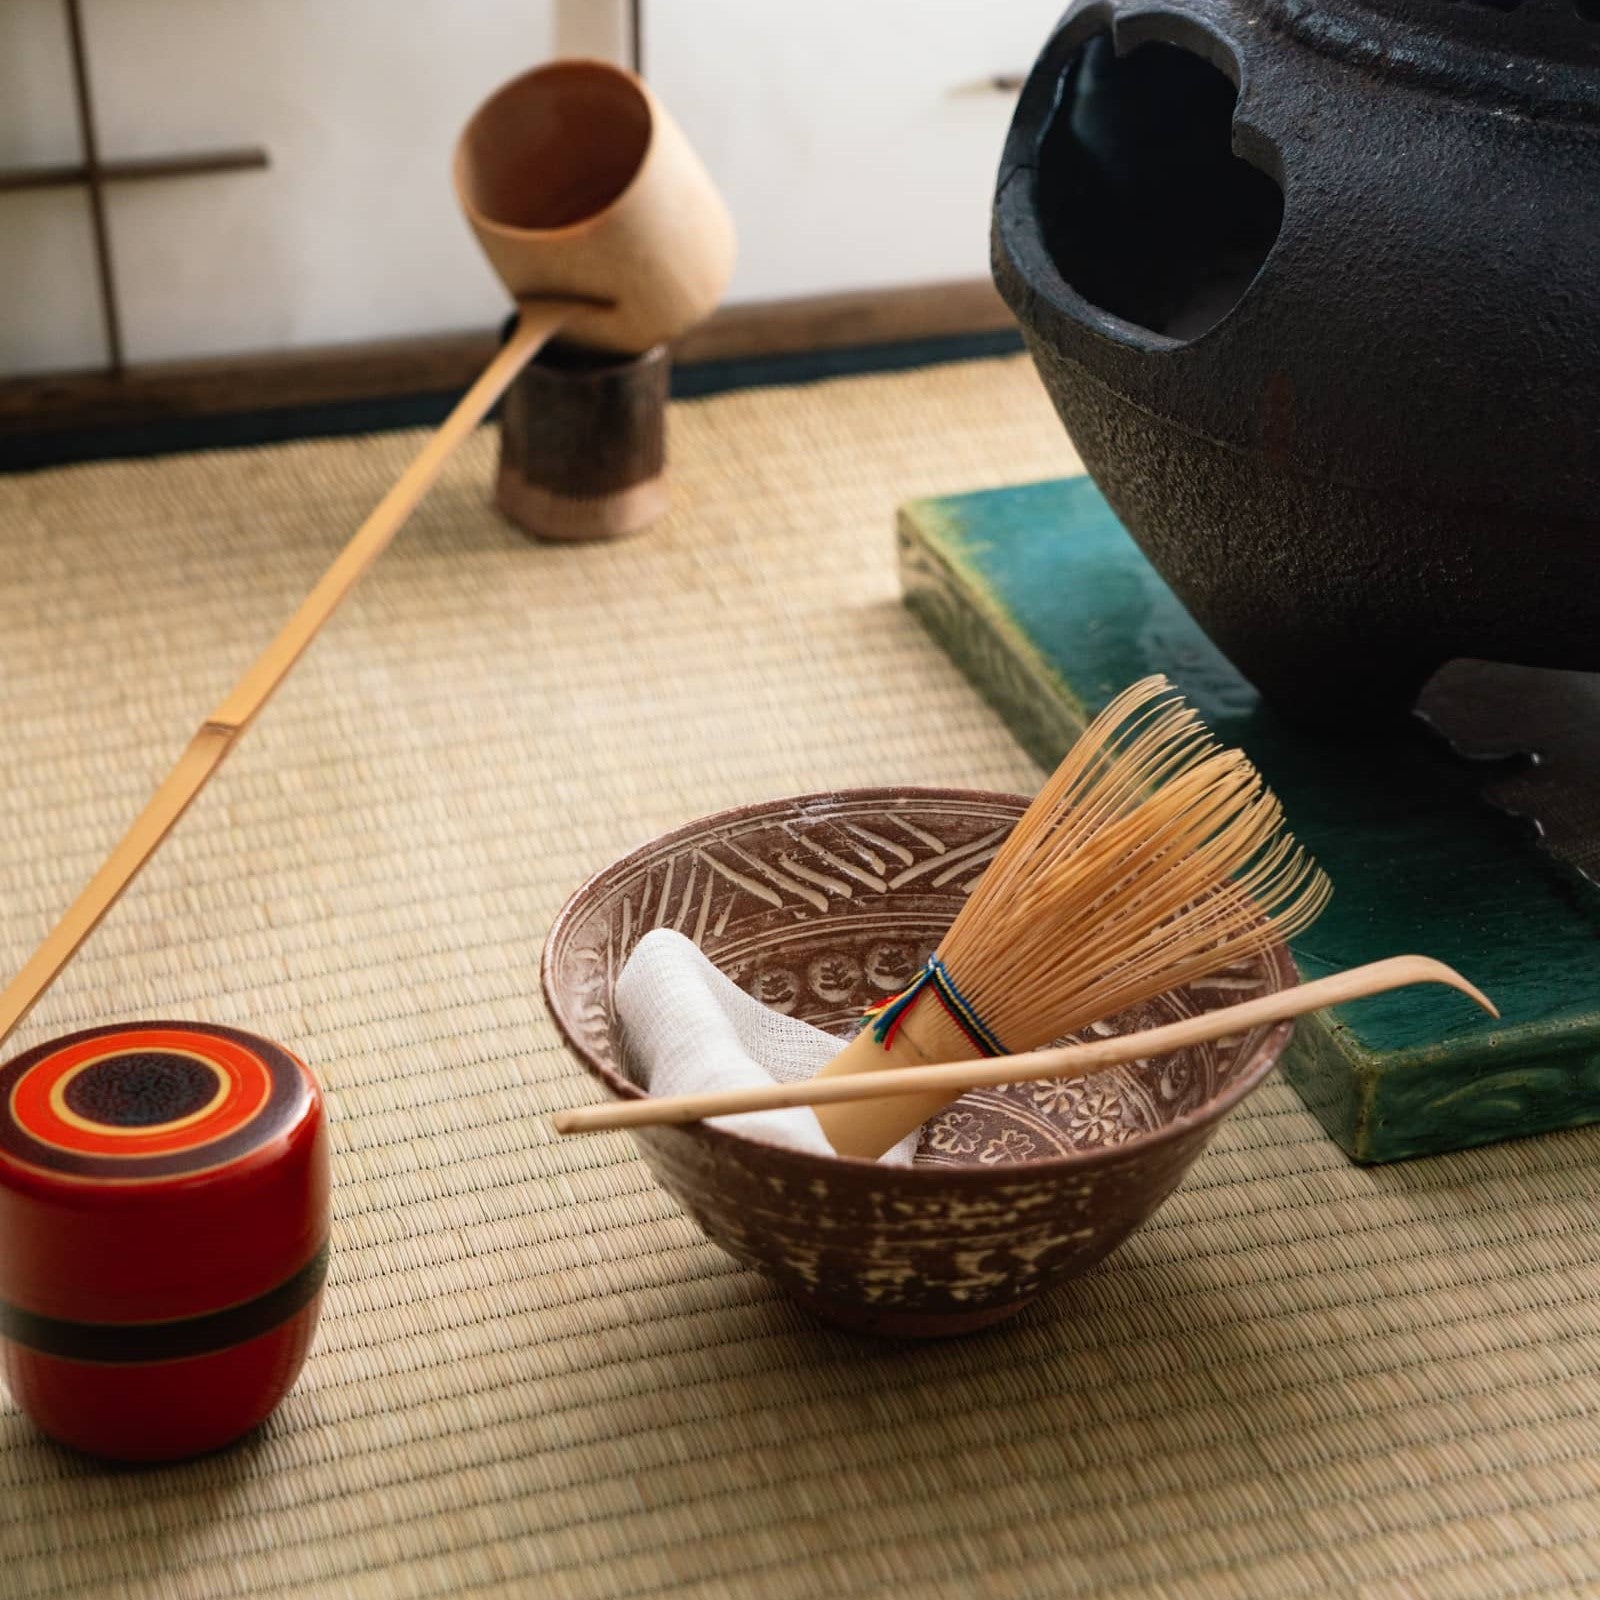 Introductory Guide to Tea Ceremony Utensils